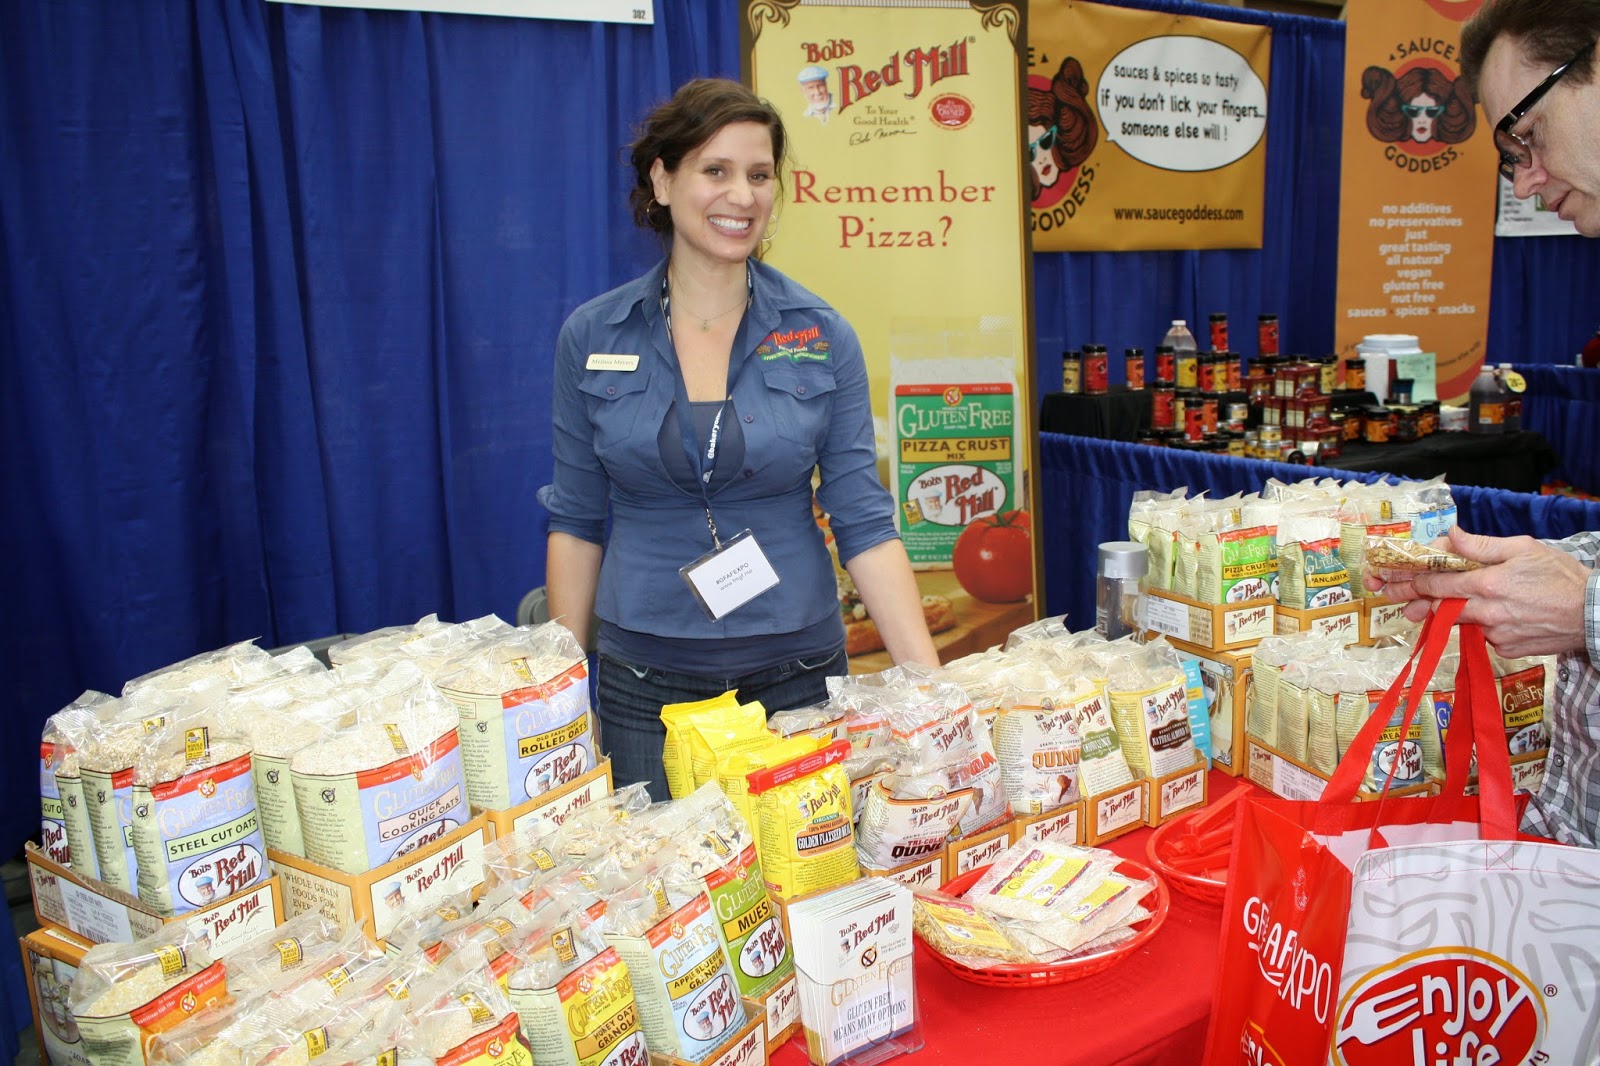 Bob's Red Mill booth with smiling rep and a table full of bagged flours and products